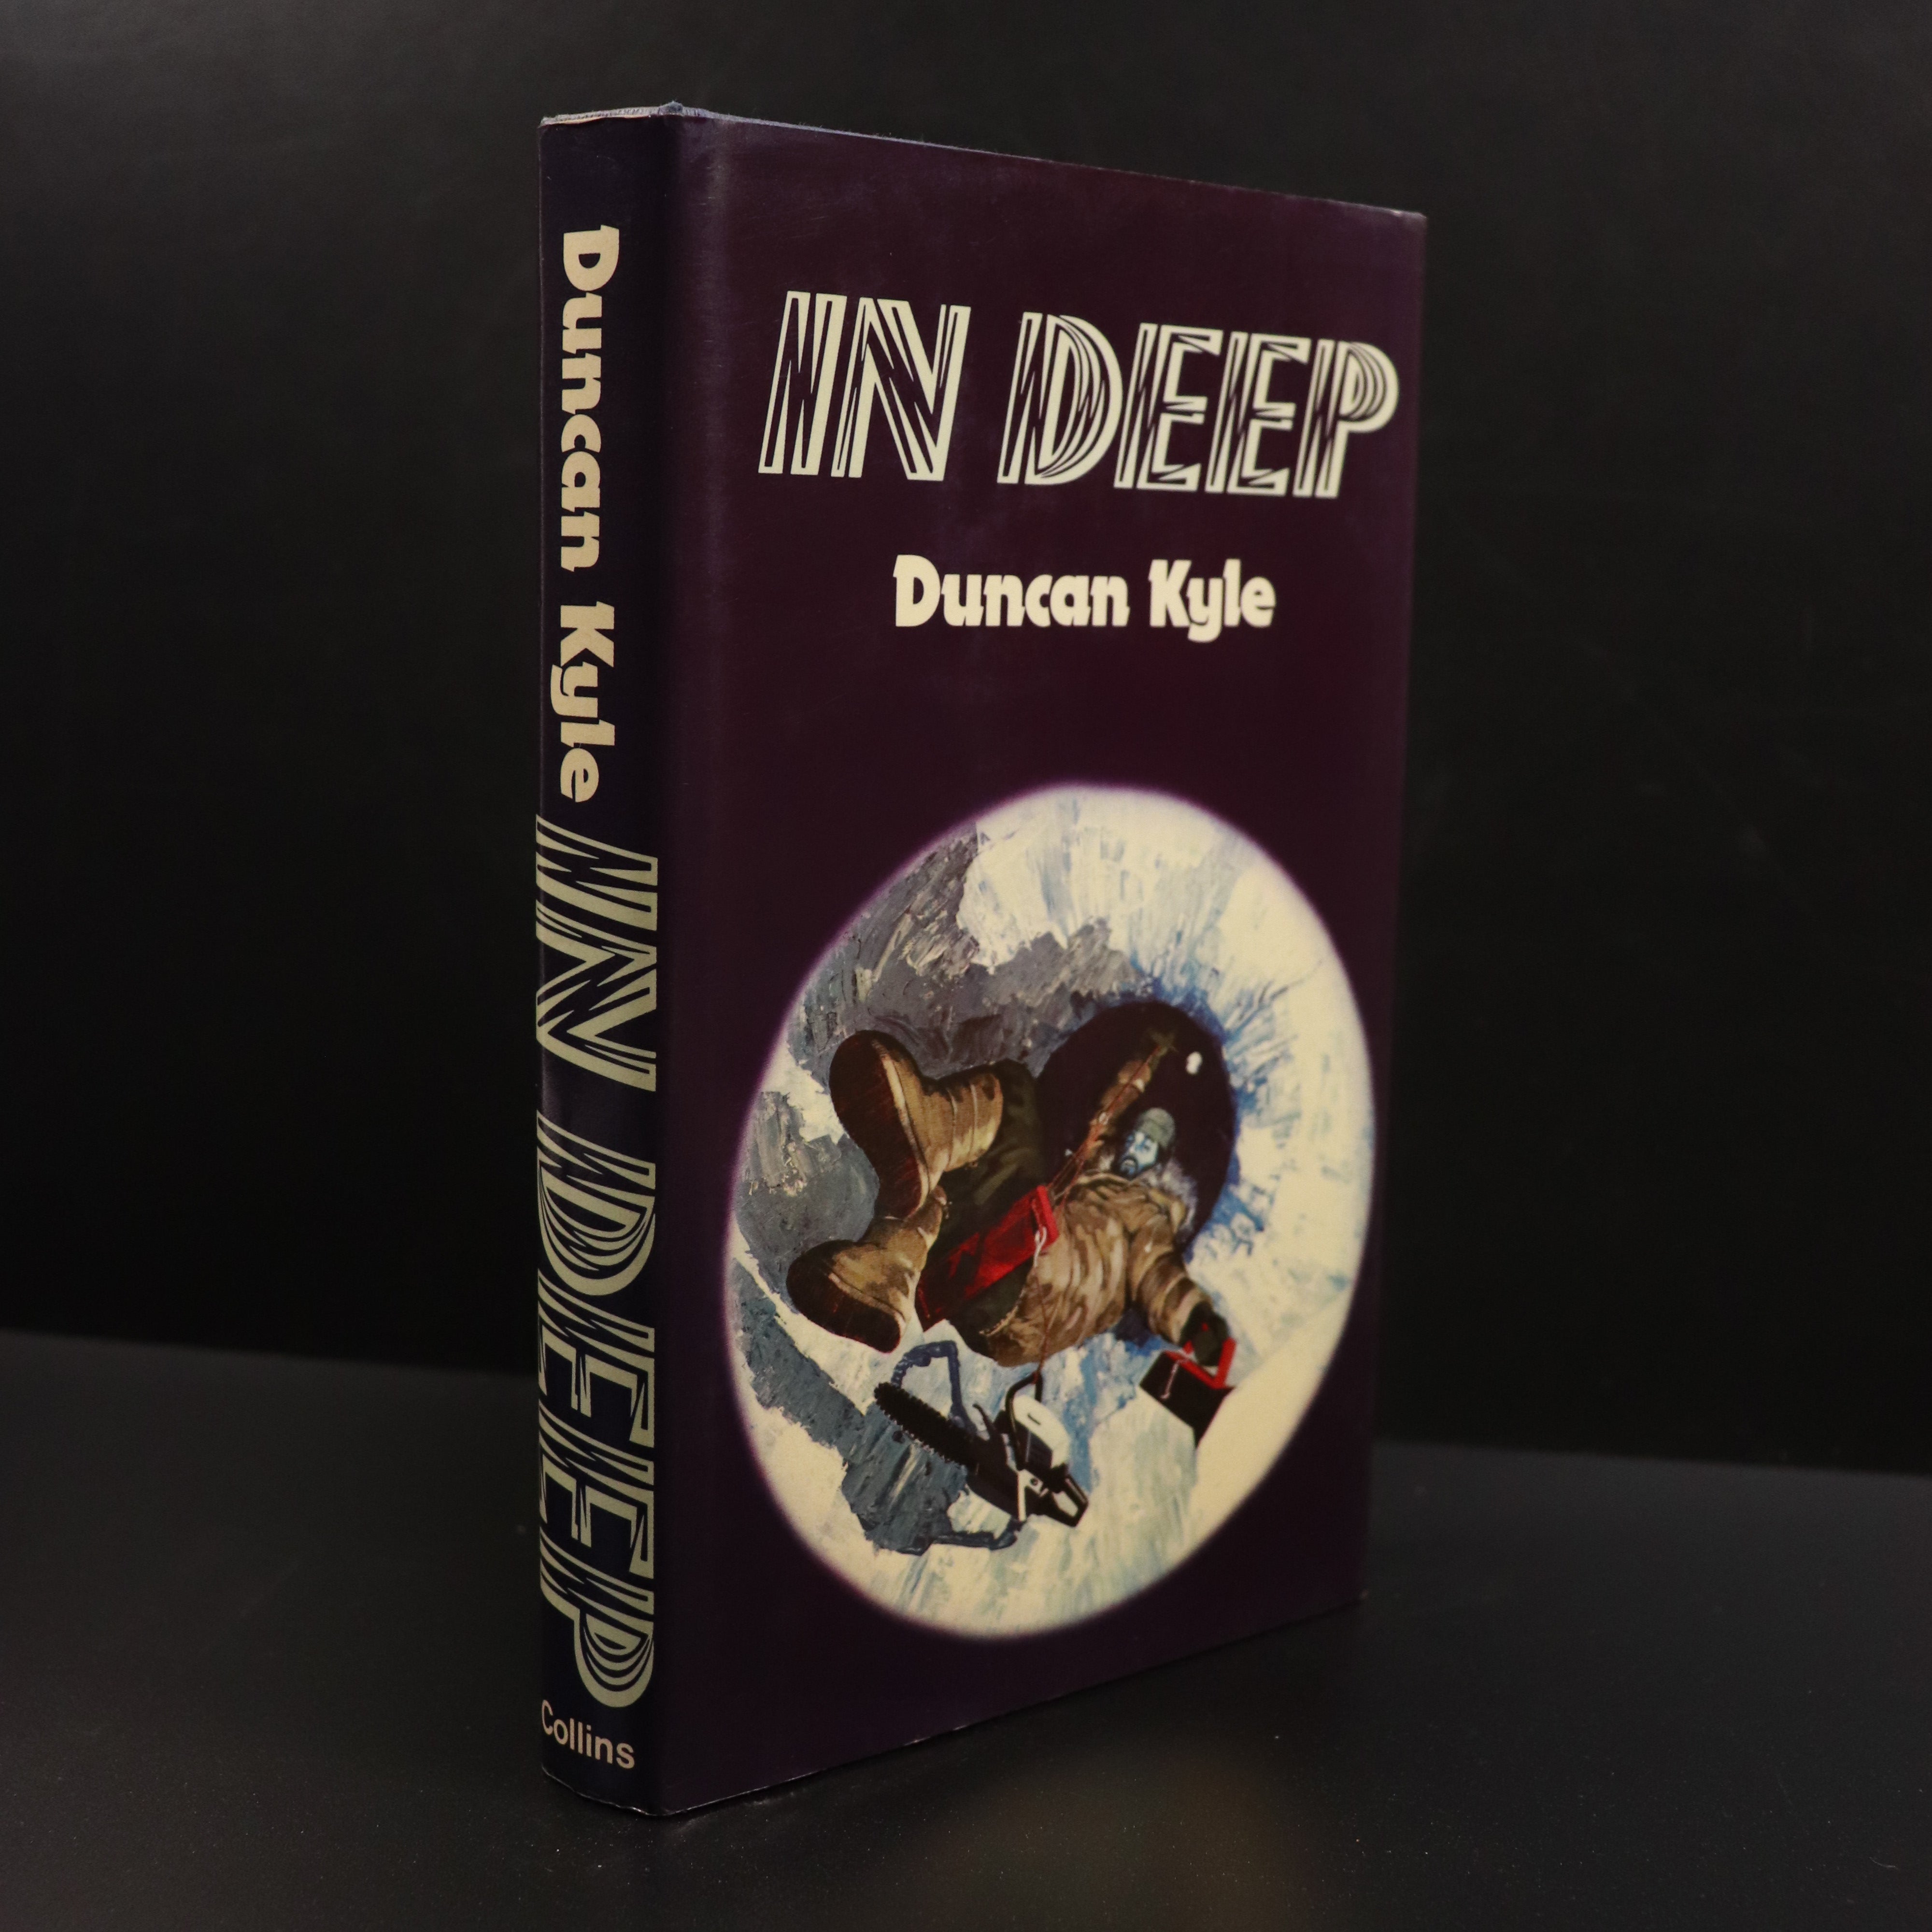 1976 In Deep by Duncan Kyle 1st Edition Vintage Adventure Fiction Book